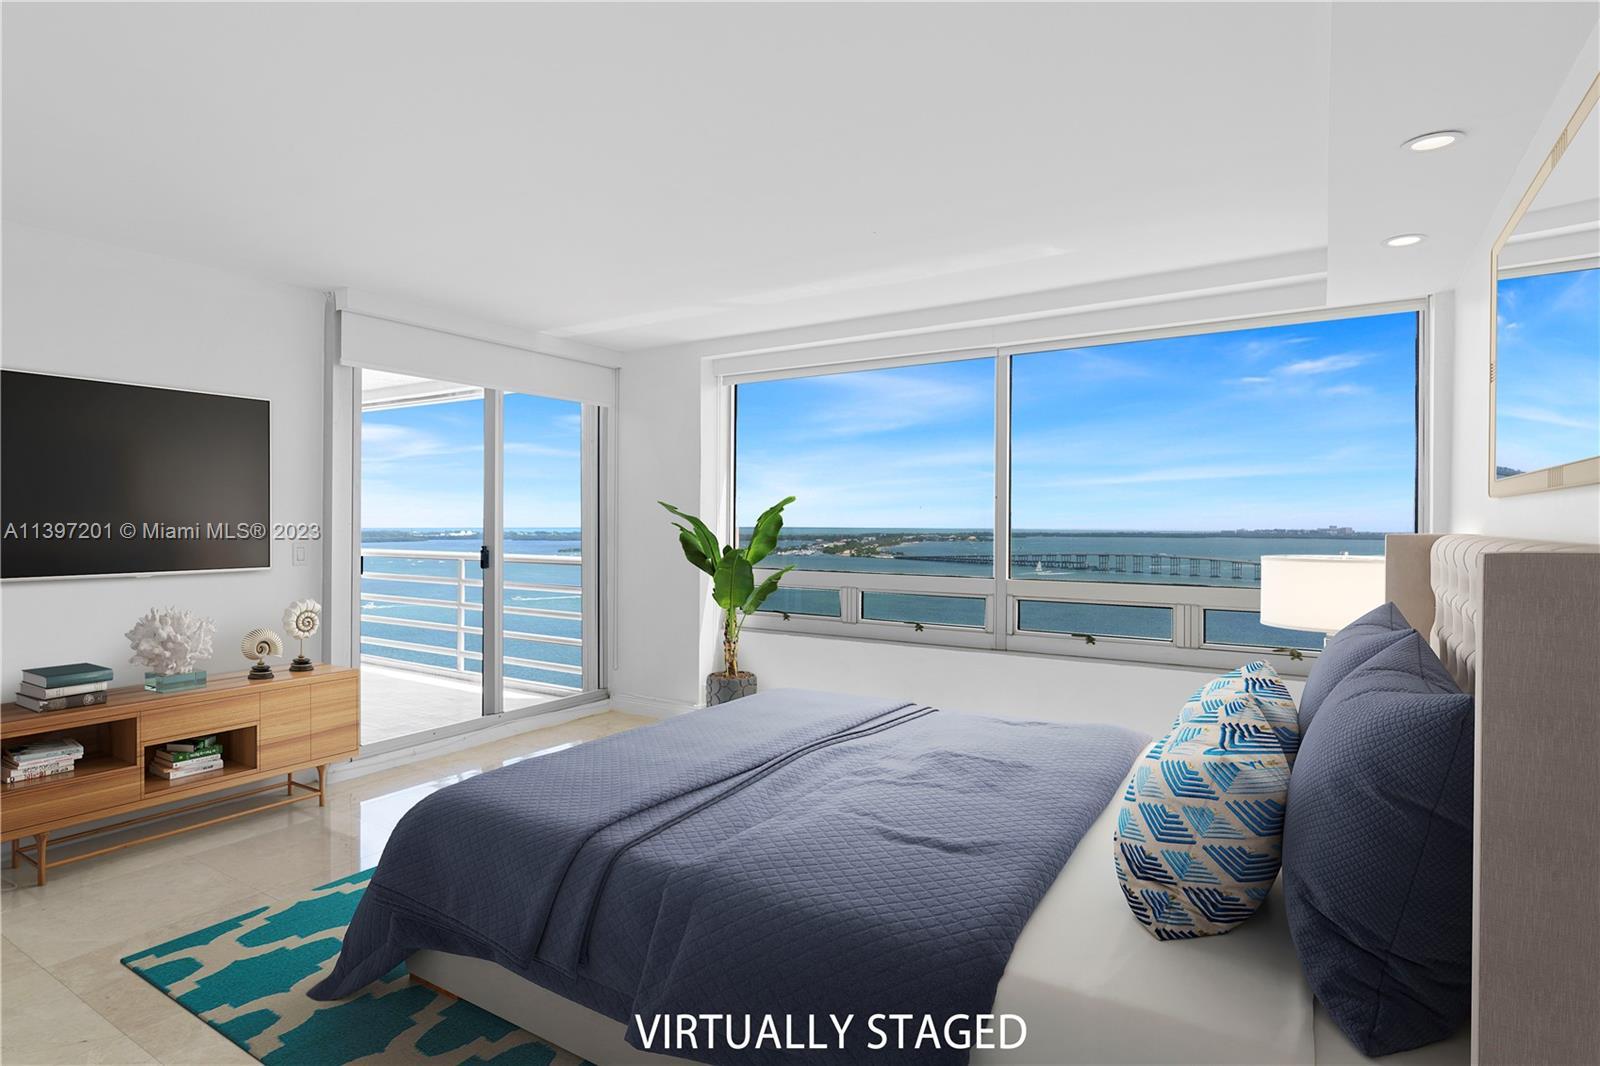 Panoramic Vistas from the Bay to the Atlantic. Expansive flow-through layout in this two-bedroom gem